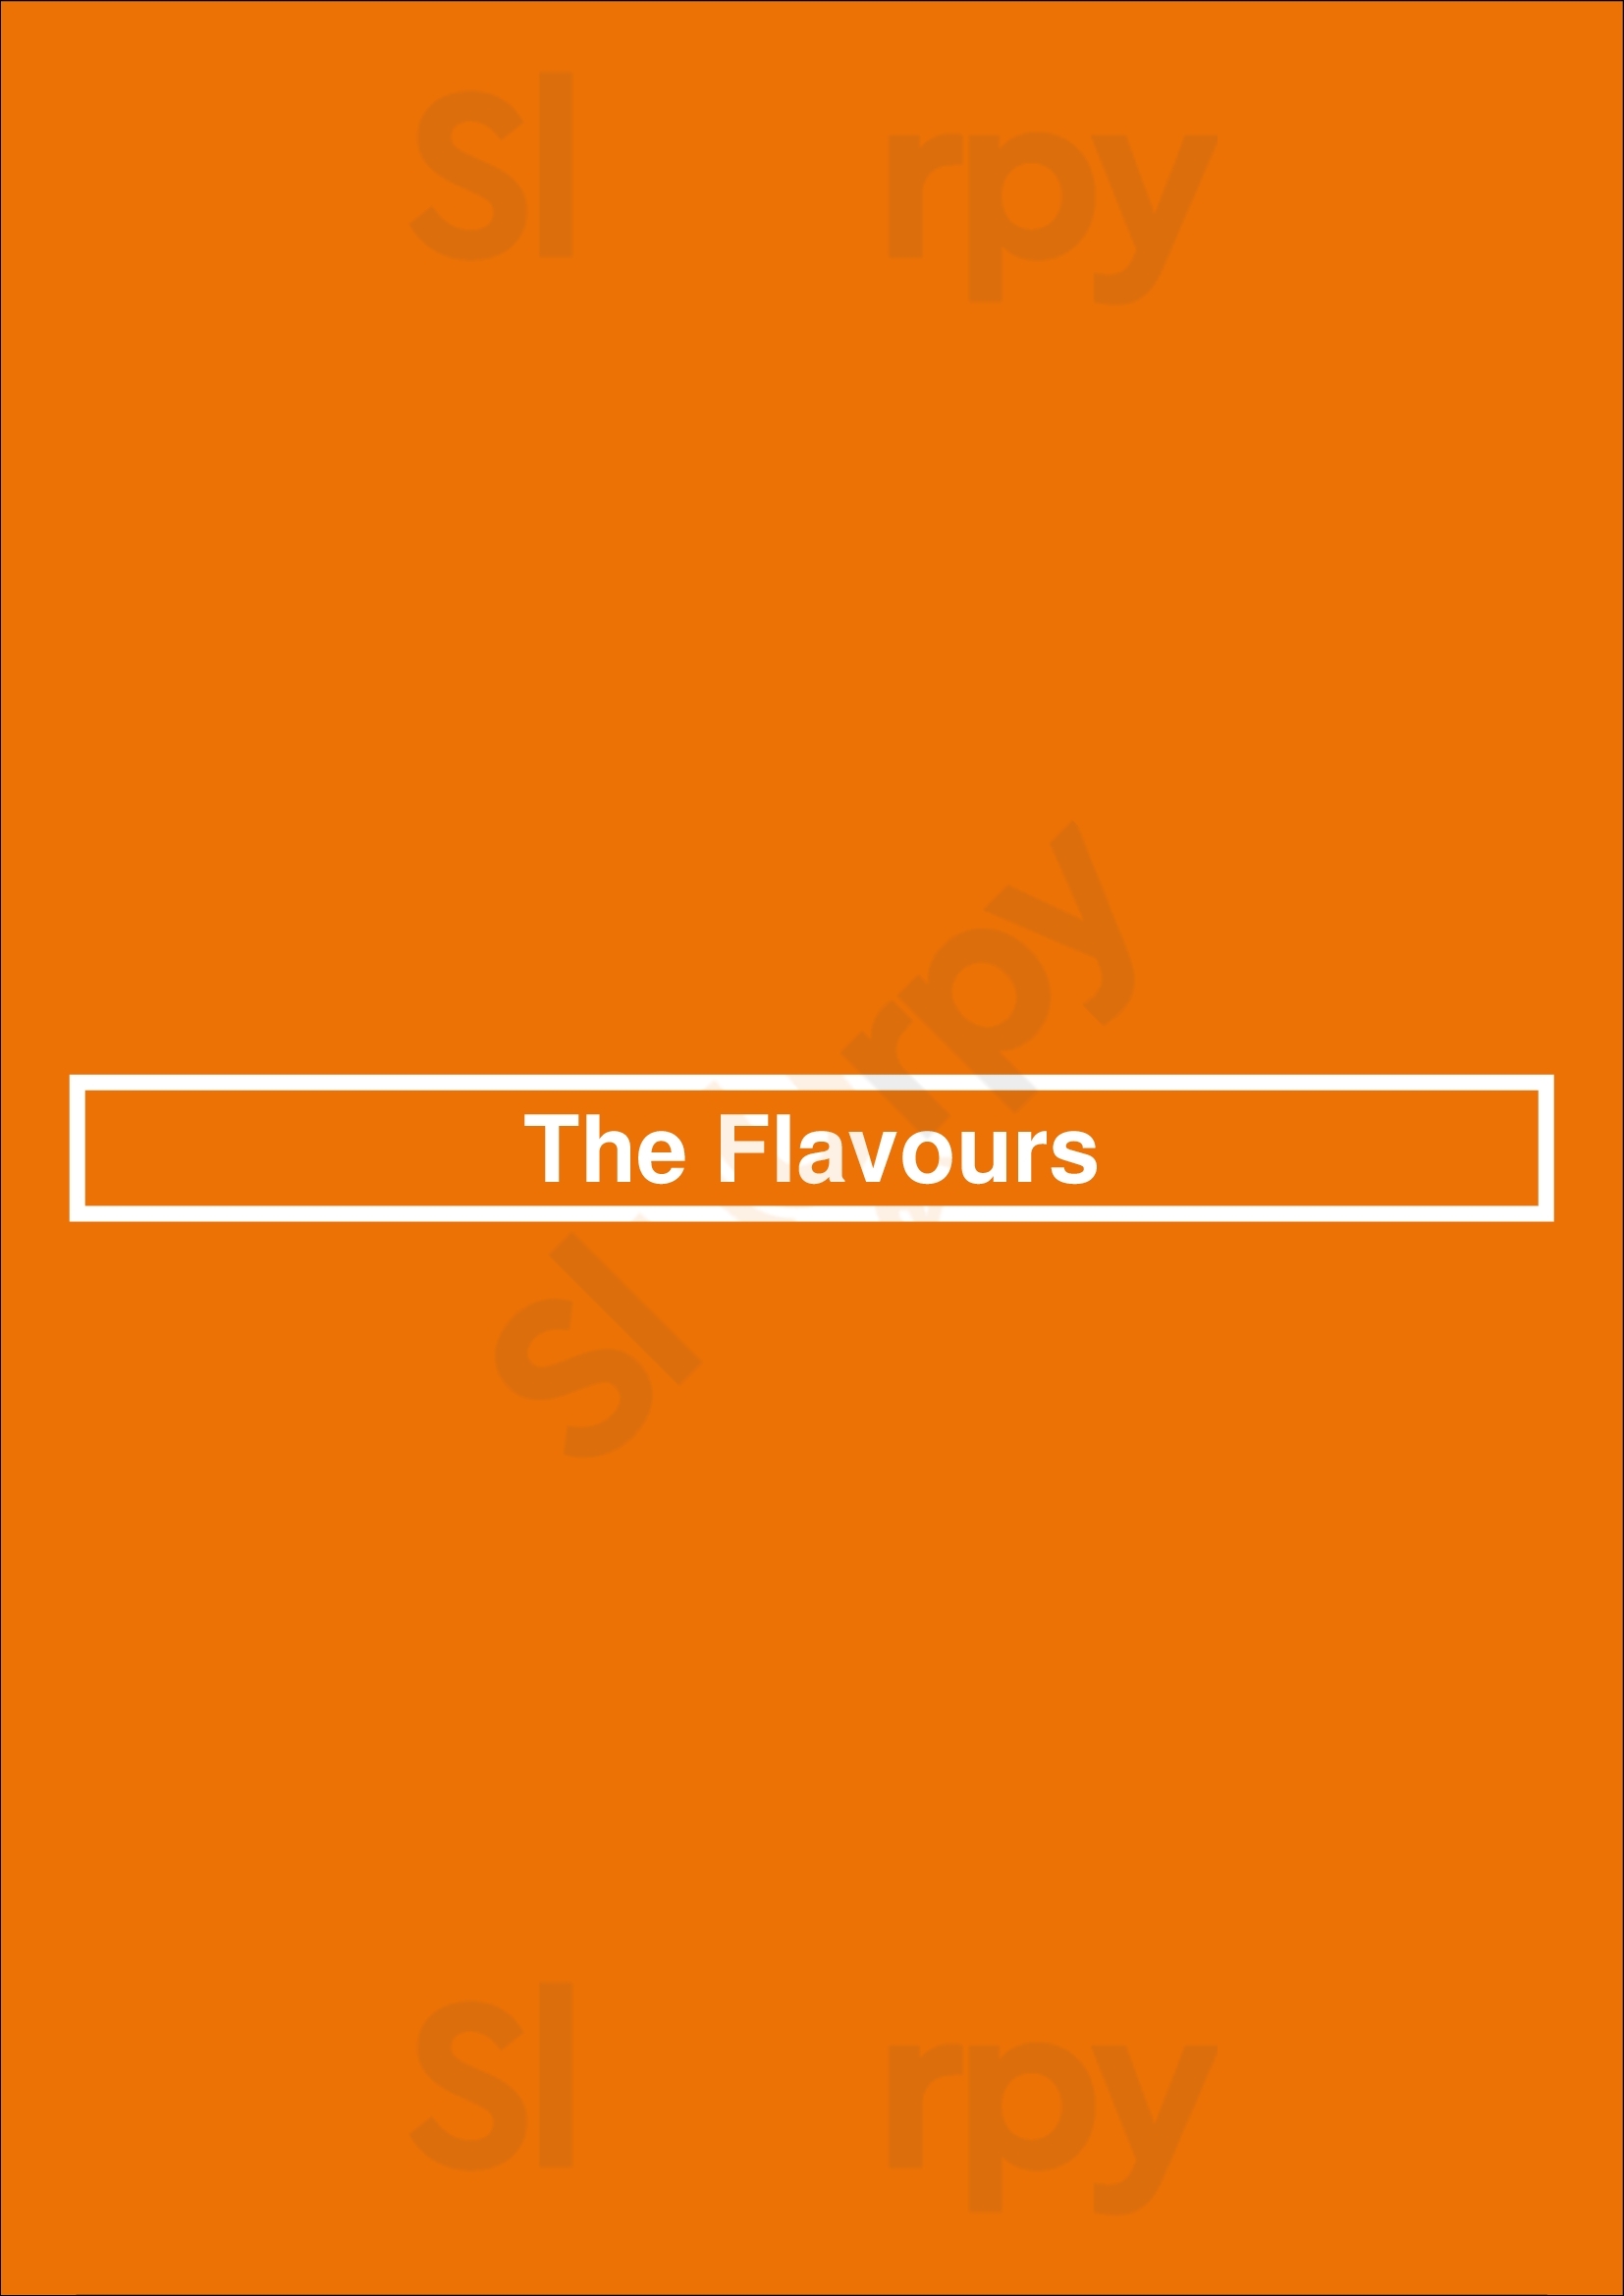 The Flavours Mississauga Menu - 1